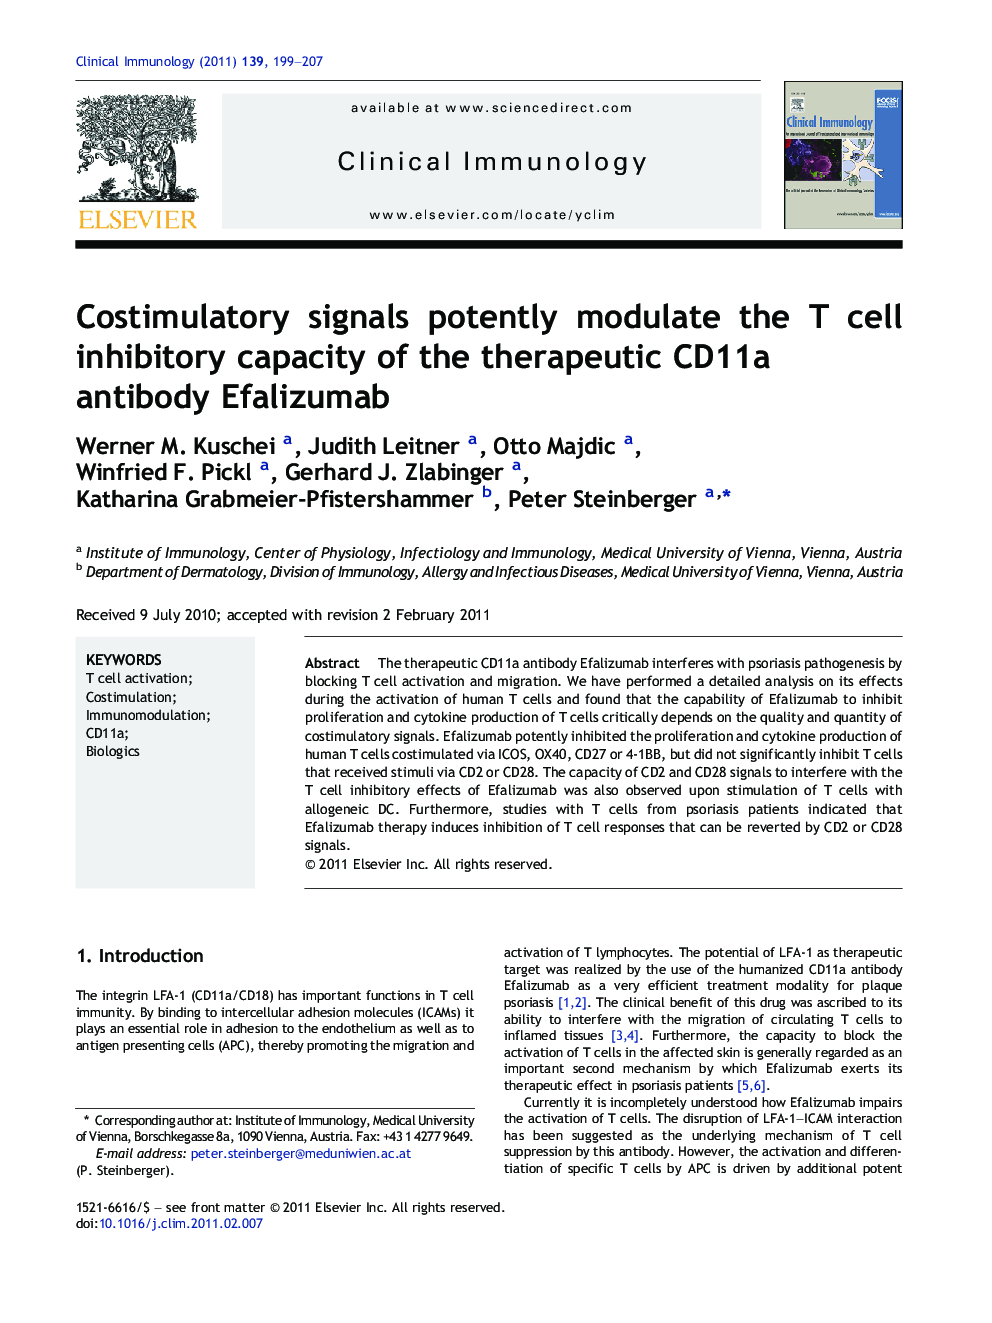 Costimulatory signals potently modulate the T cell inhibitory capacity of the therapeutic CD11a antibody Efalizumab